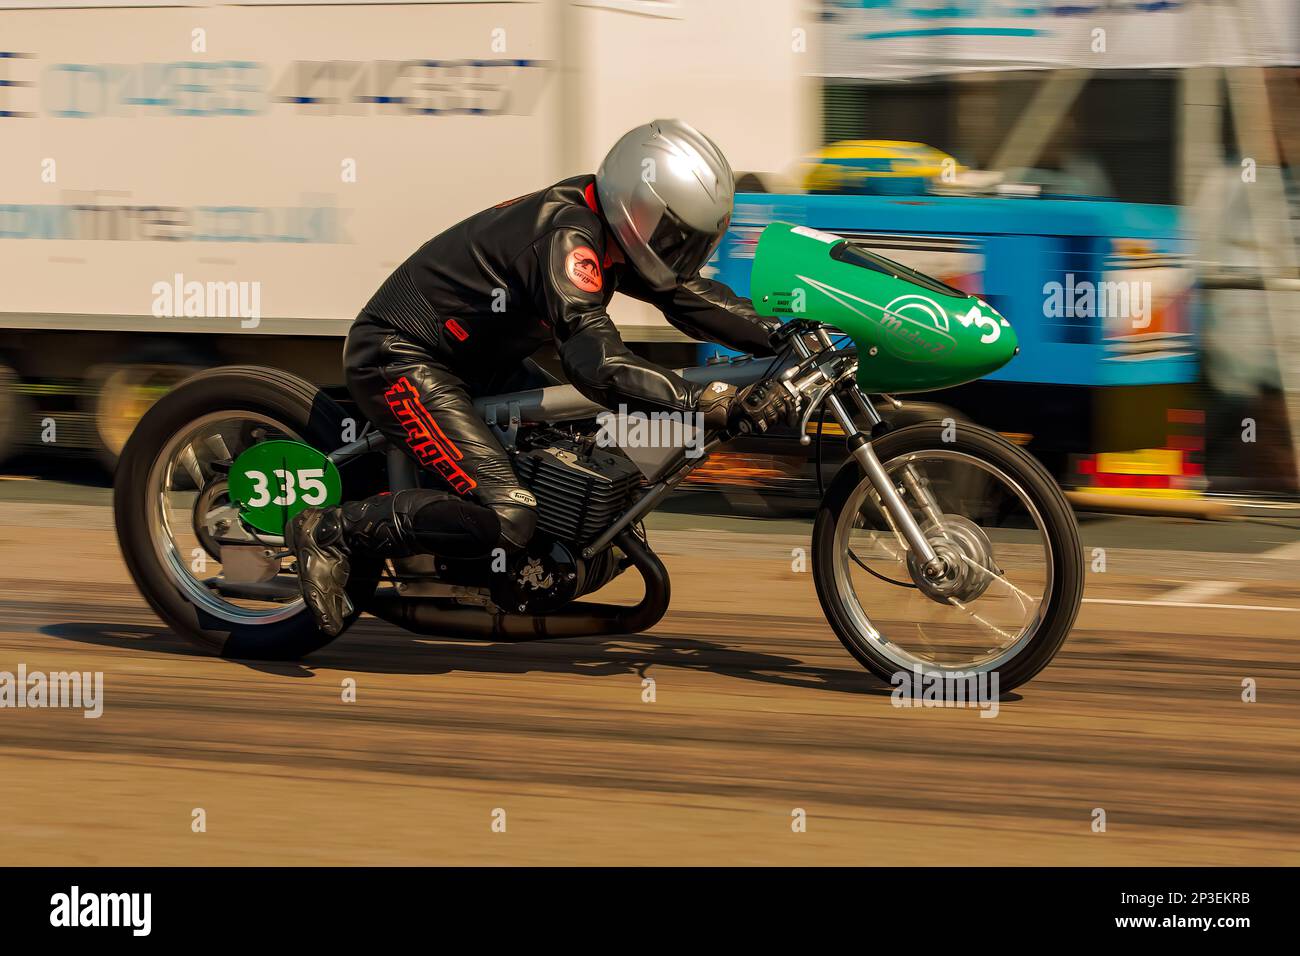 The event is currently run as a quarter mile sprint for both cars and motorcycles, held under the auspices of the Motor Sports Association. This image features Gavin Shaw riding a Madnez custom motorcycle. The event is organised by the Brighton and Hove Motor Club run along Madeira Drive, Brighton Sea Front, City of Brighton & Hove, UK. 2nd September 2017 Stock Photo